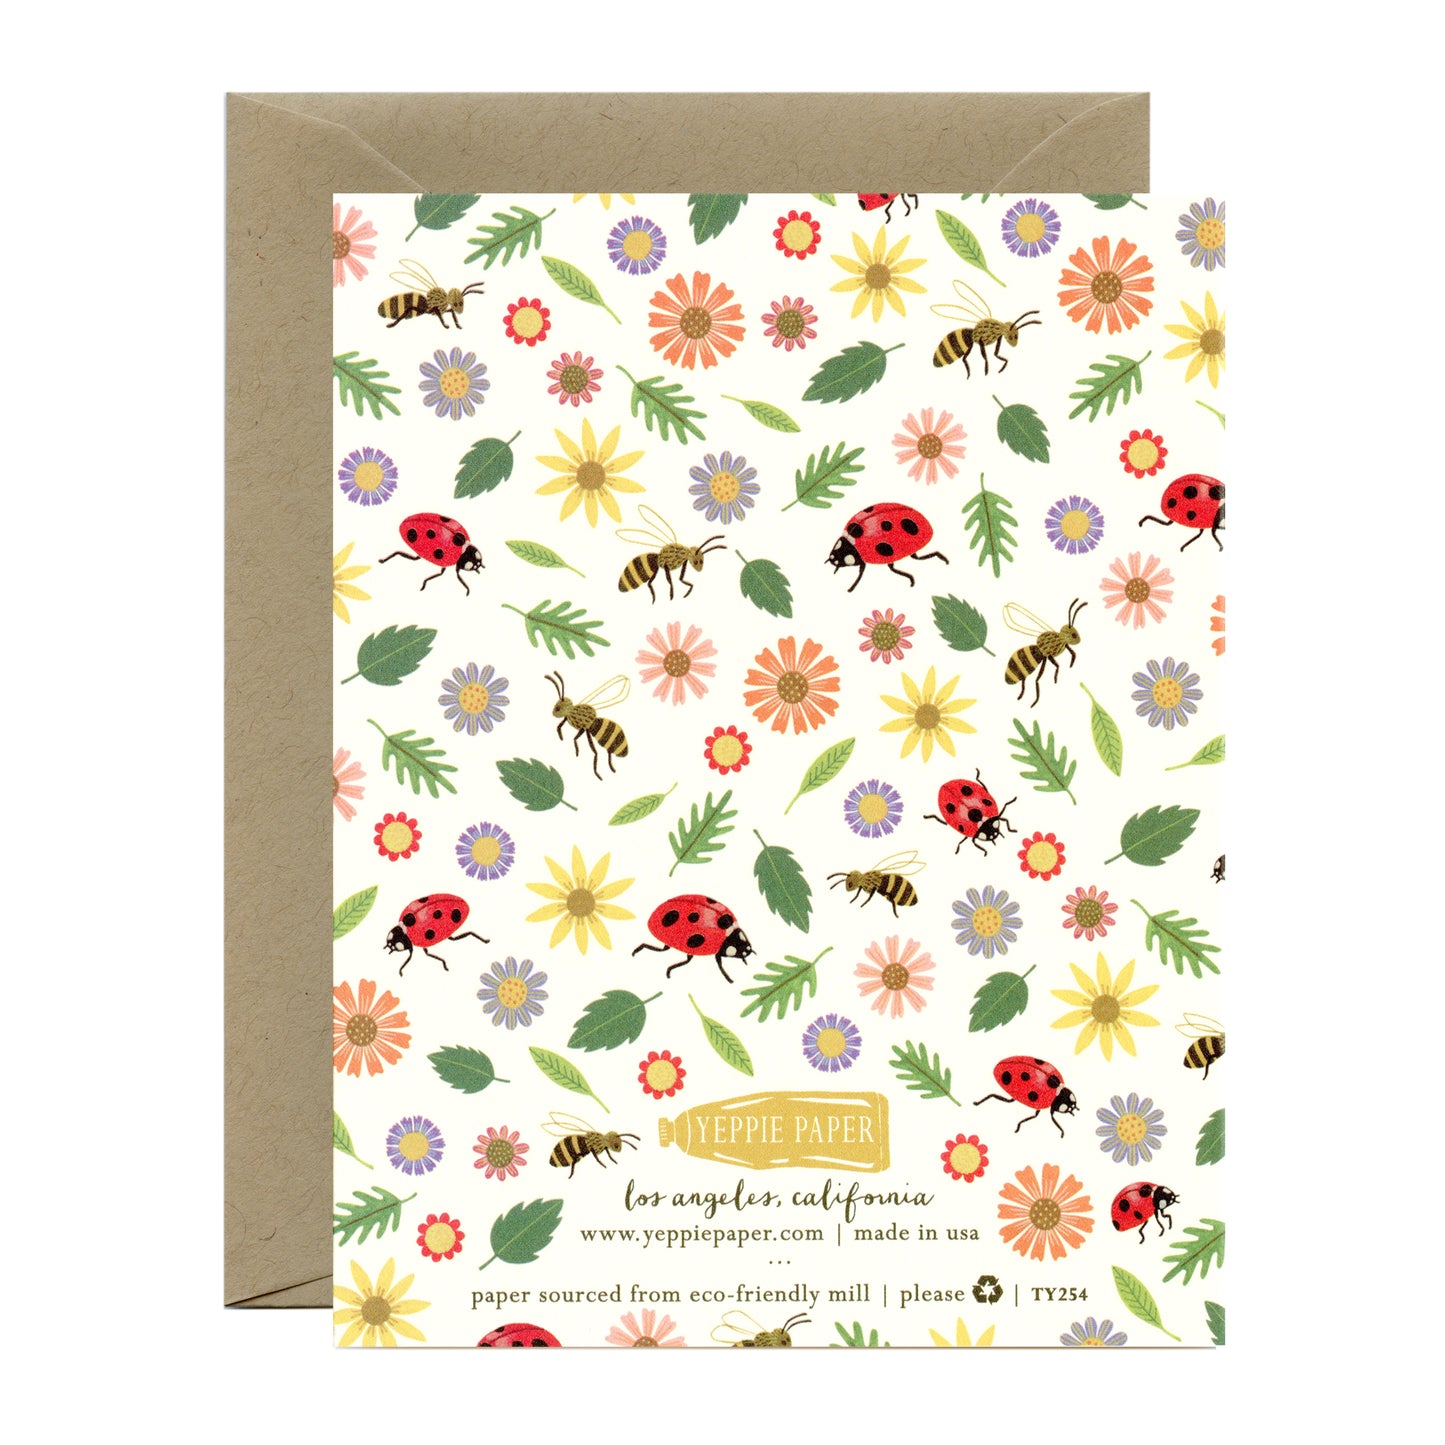 LADYBUGS, BUMBLE BEES AND FLOWERS - THANK YOU GREETING CARDS, BOXED SET OF 8